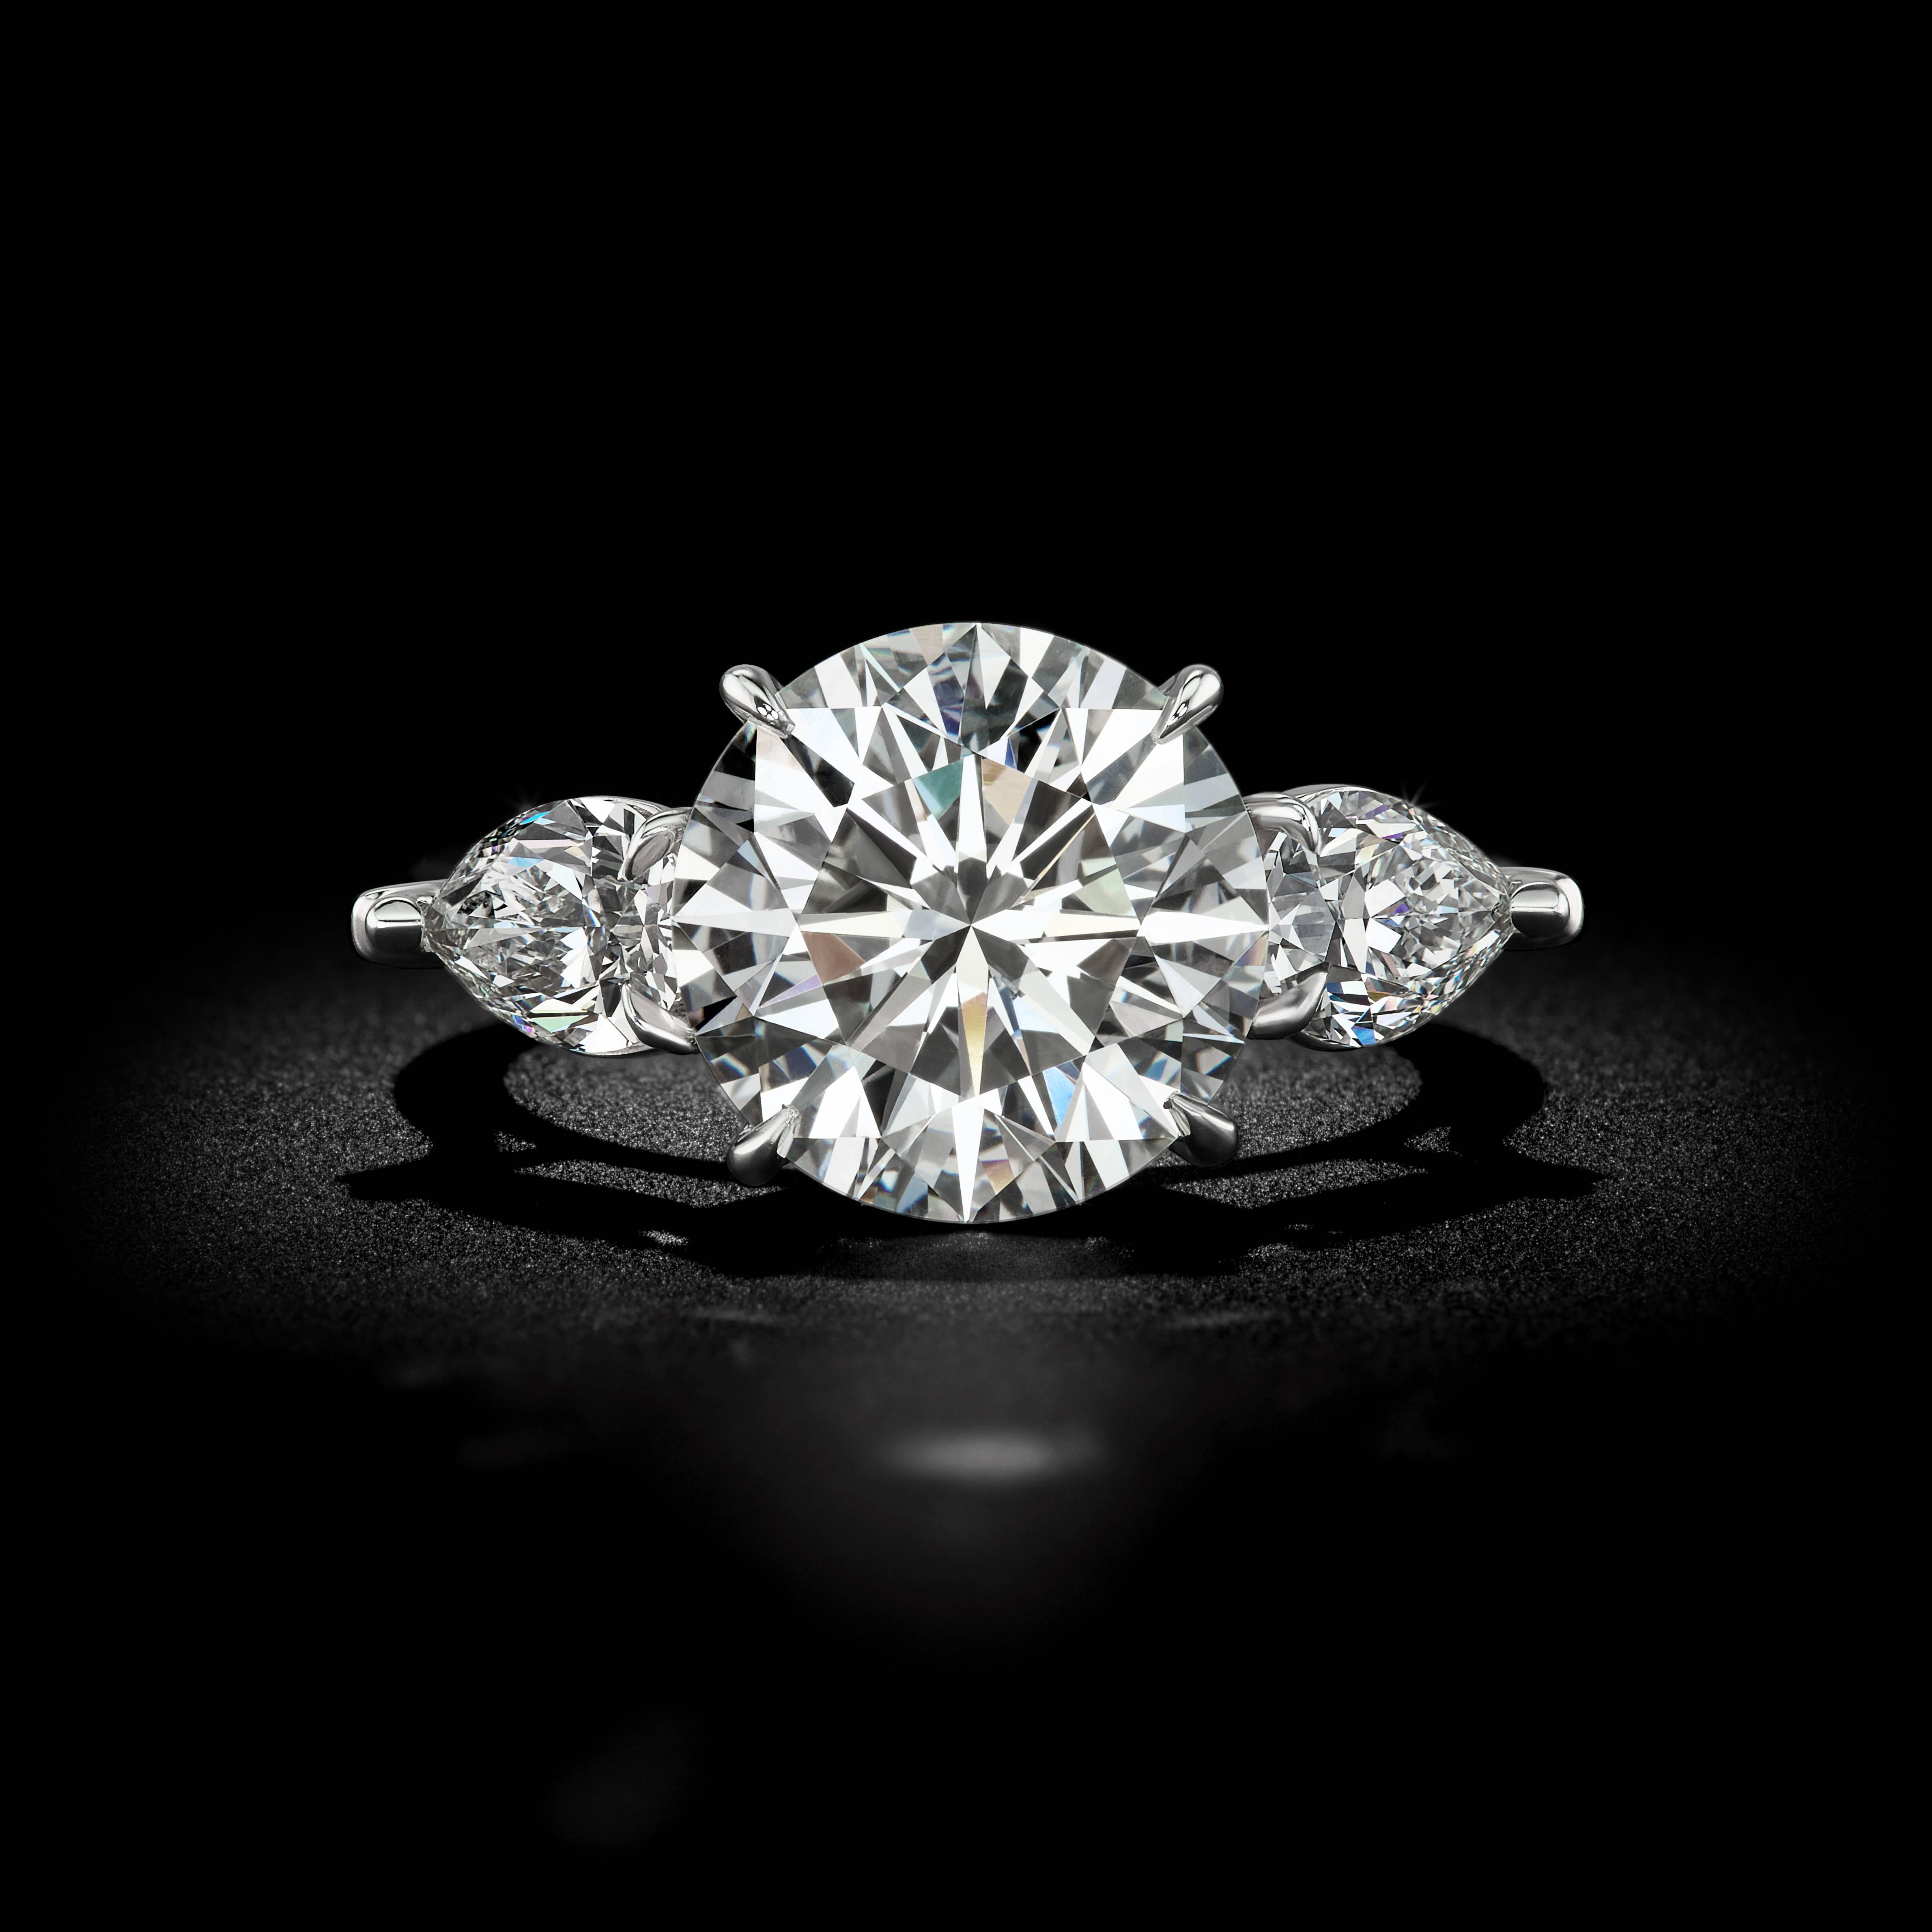 This exquisite 6.28ct I color SI2 accompanied with a GIA certificate. This Brilliant   round diamond is set in a David Rosenberg Platinum Mounting. Flanked by a matching pair of 1.52tw pear shape diamonds and has a color and clarity of I VS2.